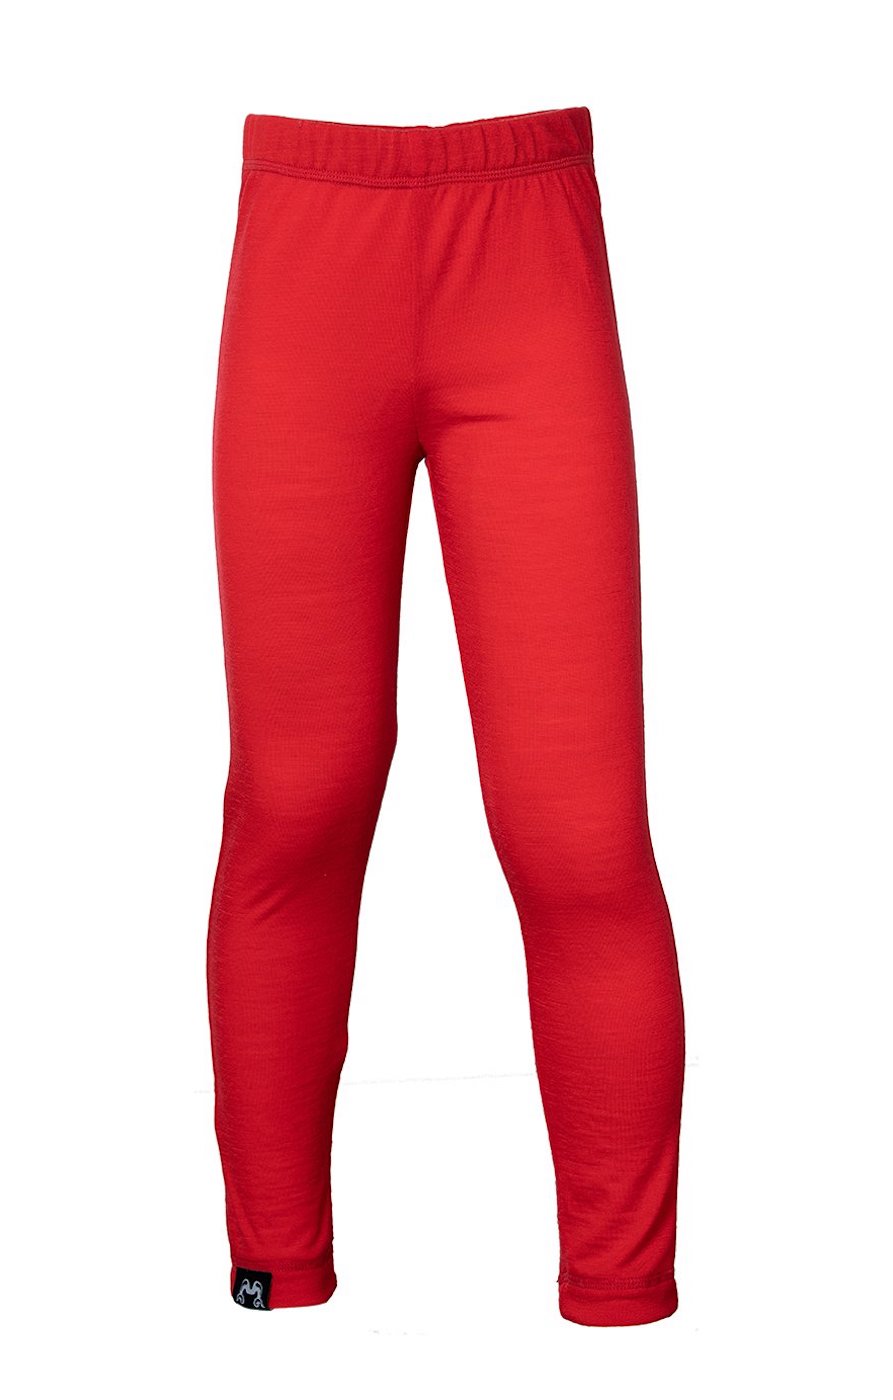 Women's Leggings, Tights & Sports Clothes Cotton On